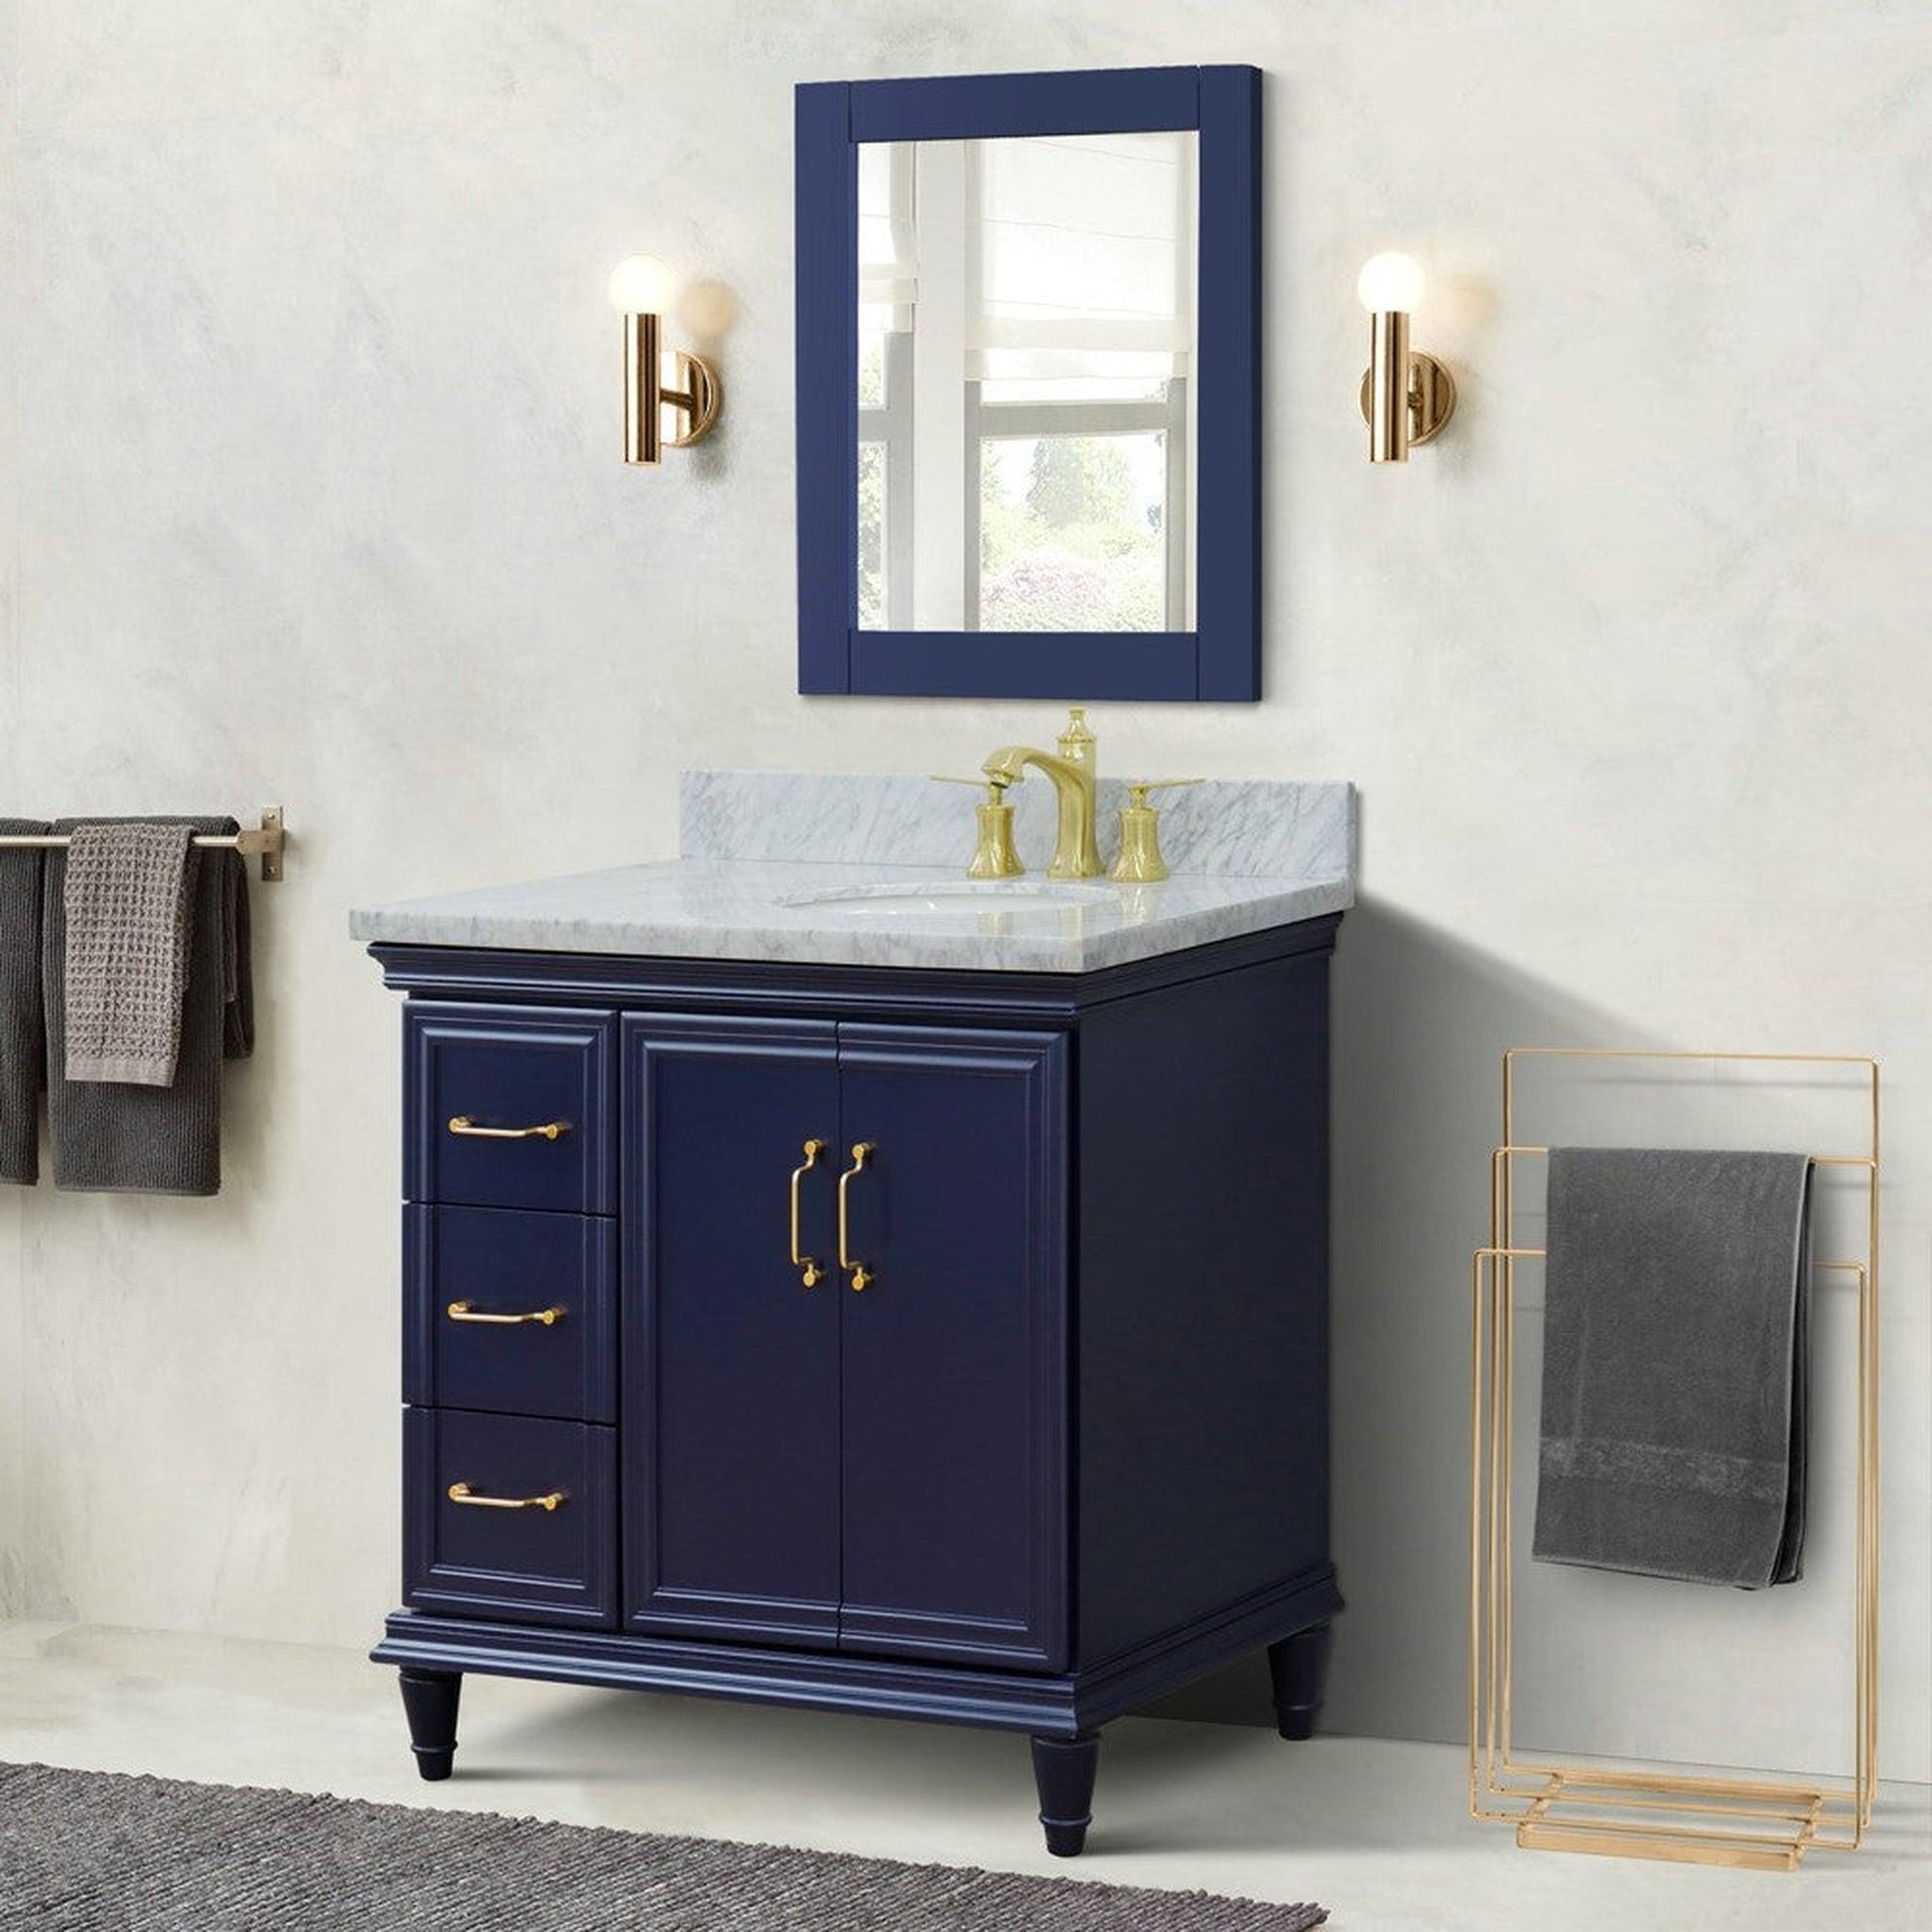 Bellaterra Home Forli 37" 2-Door 3-Drawer Blue Freestanding Vanity Set With Ceramic Right Offset Undermount Oval Sink and White Carrara Marble Top, and Right Door Cabinet